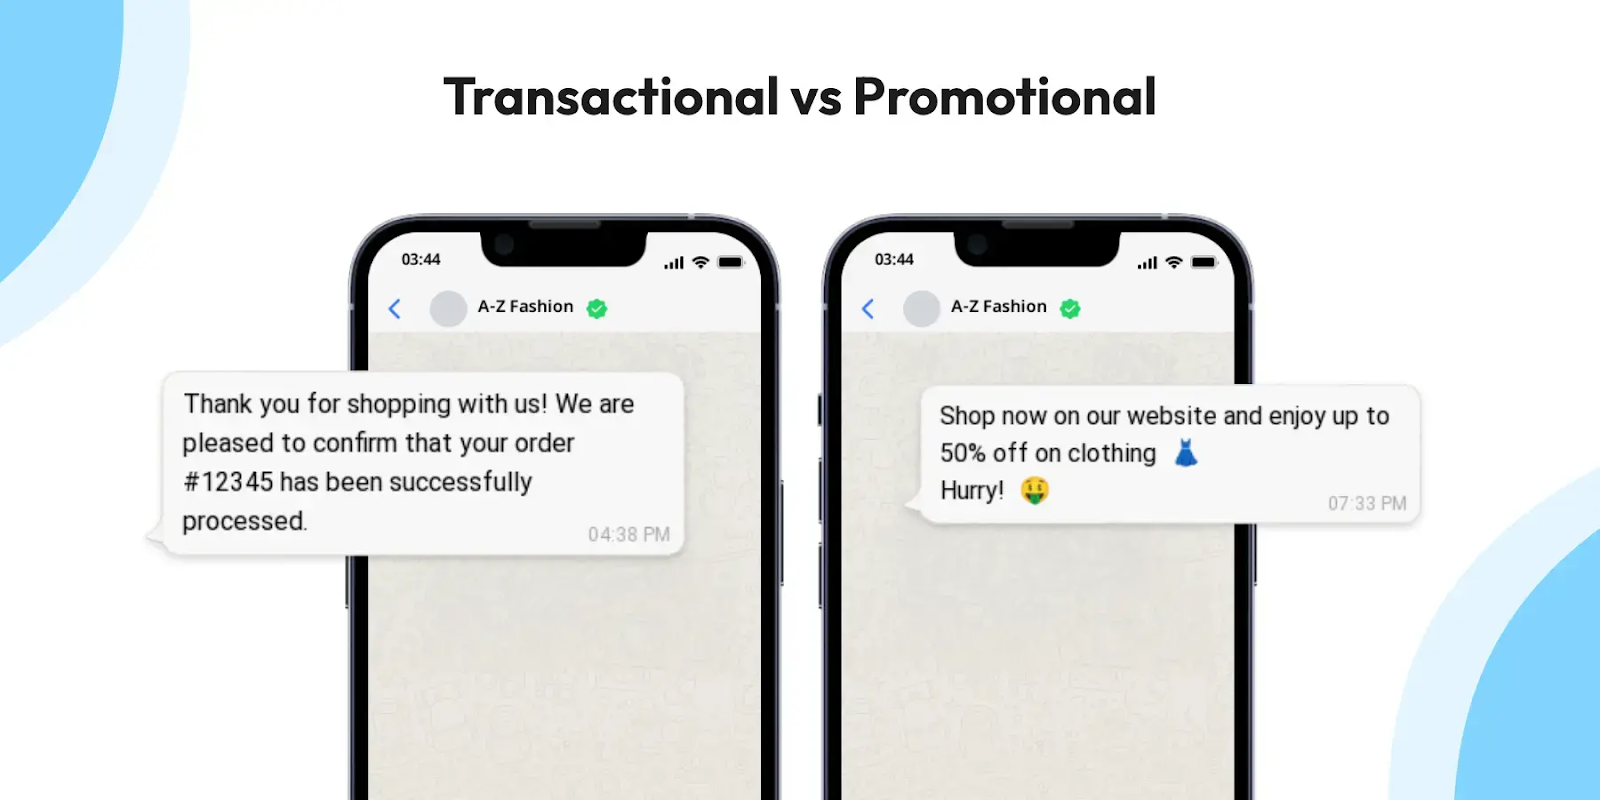 examples of transactional and promotional messages